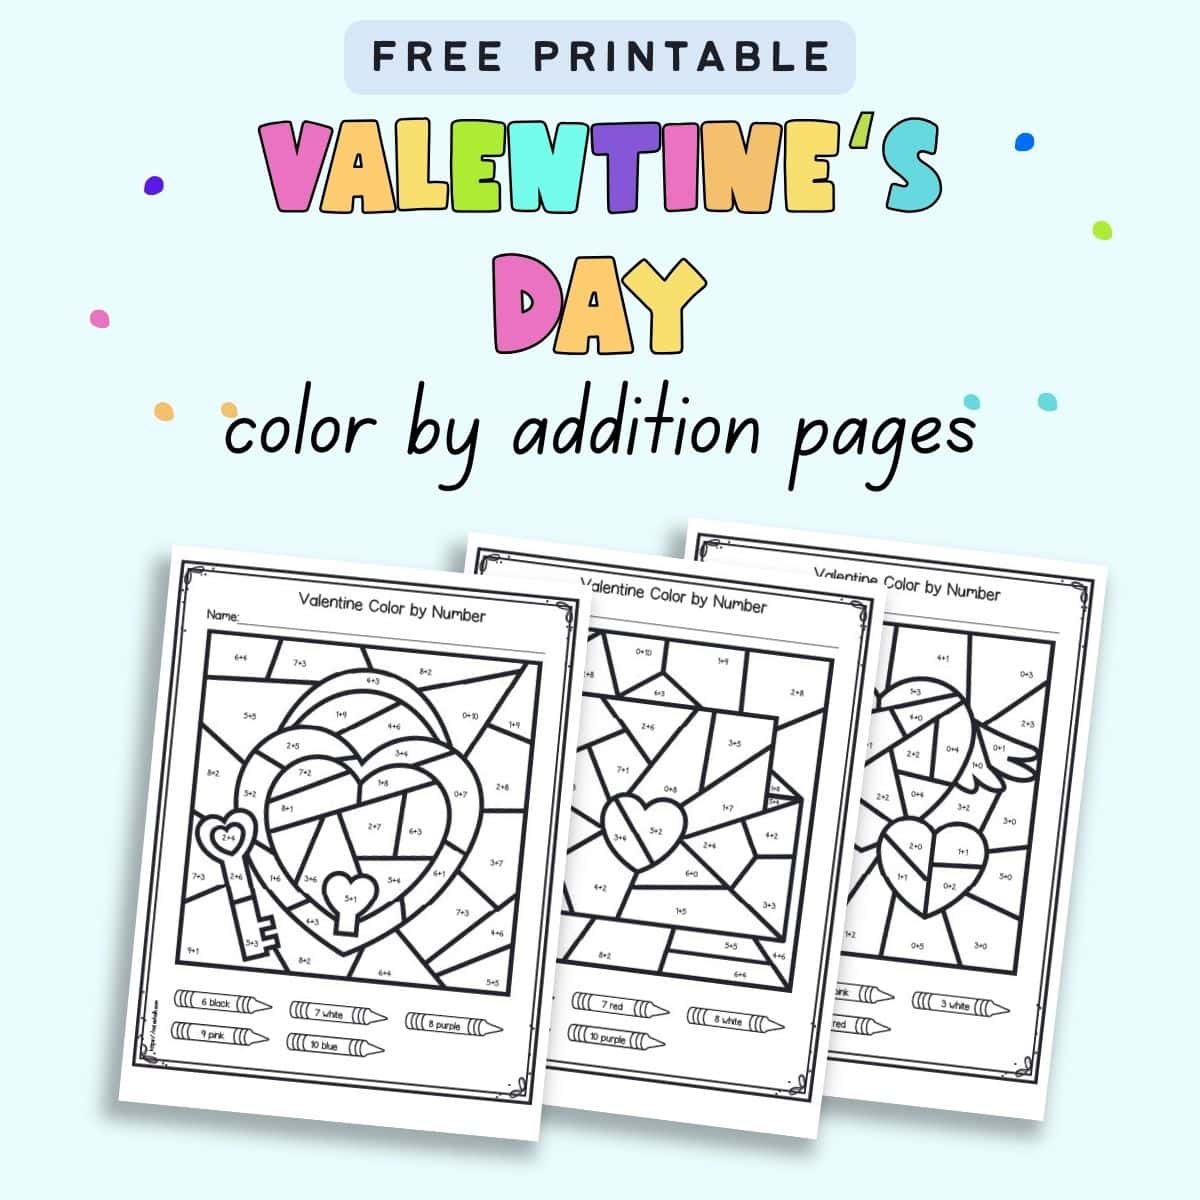 Text "free printable Valentine's Day color by addition pages" with a preview of three color by code addition pages